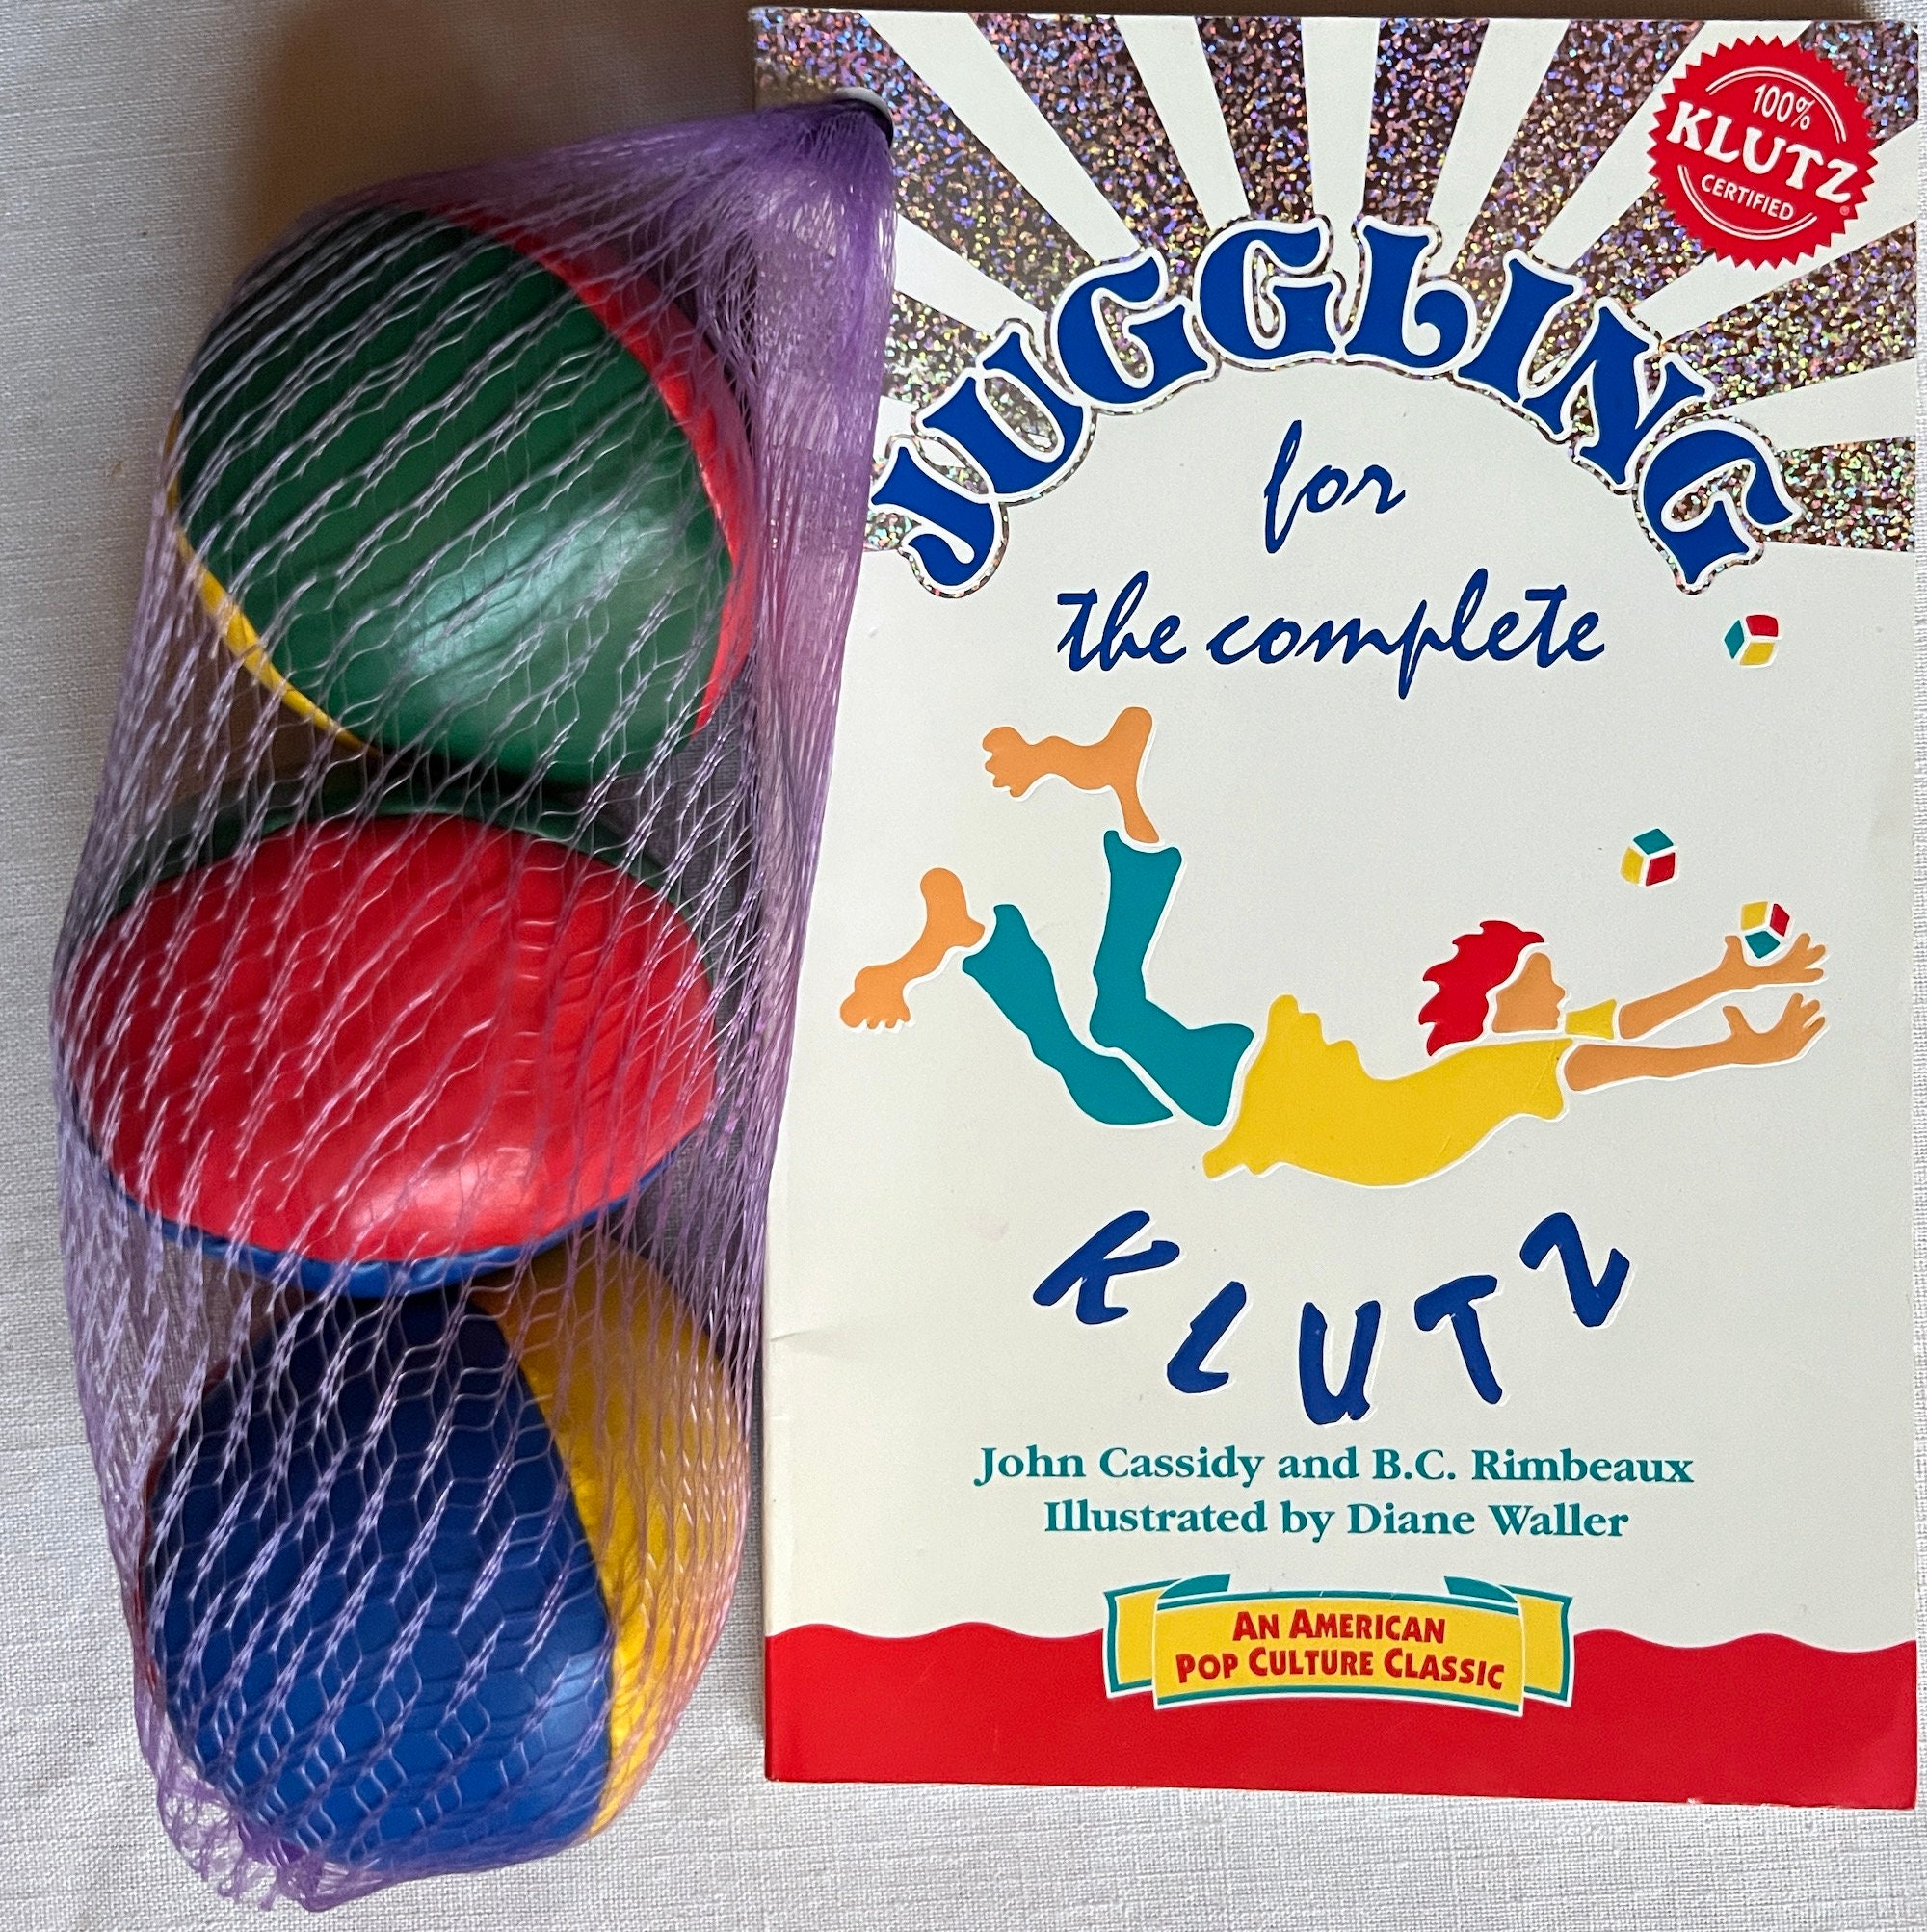 JUGGLING FOR KLUTZ - THE TOY STORE